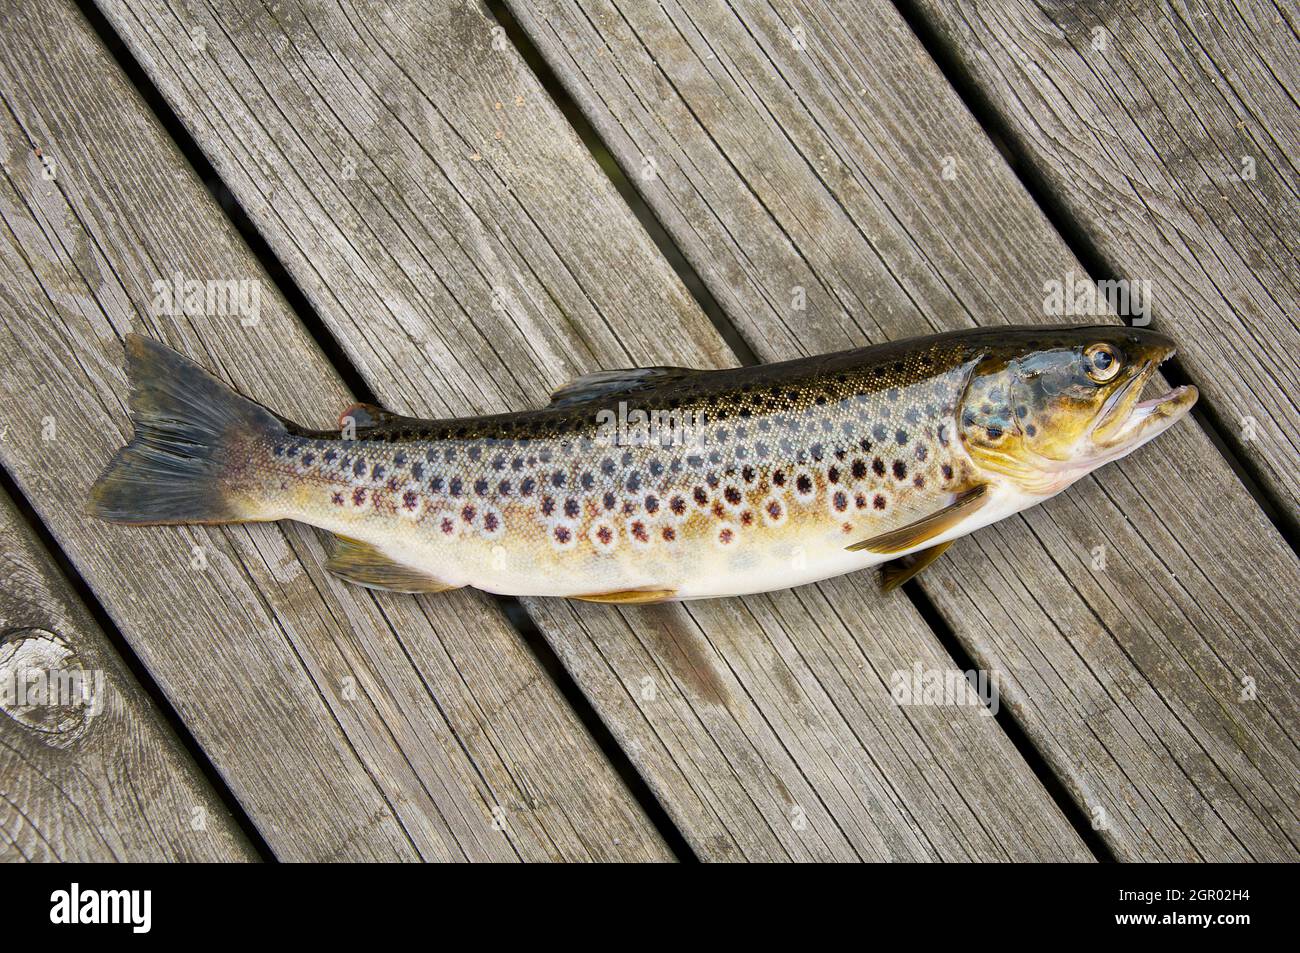 Fishing trout in Norway. Fish on wooden board. Stock Photo